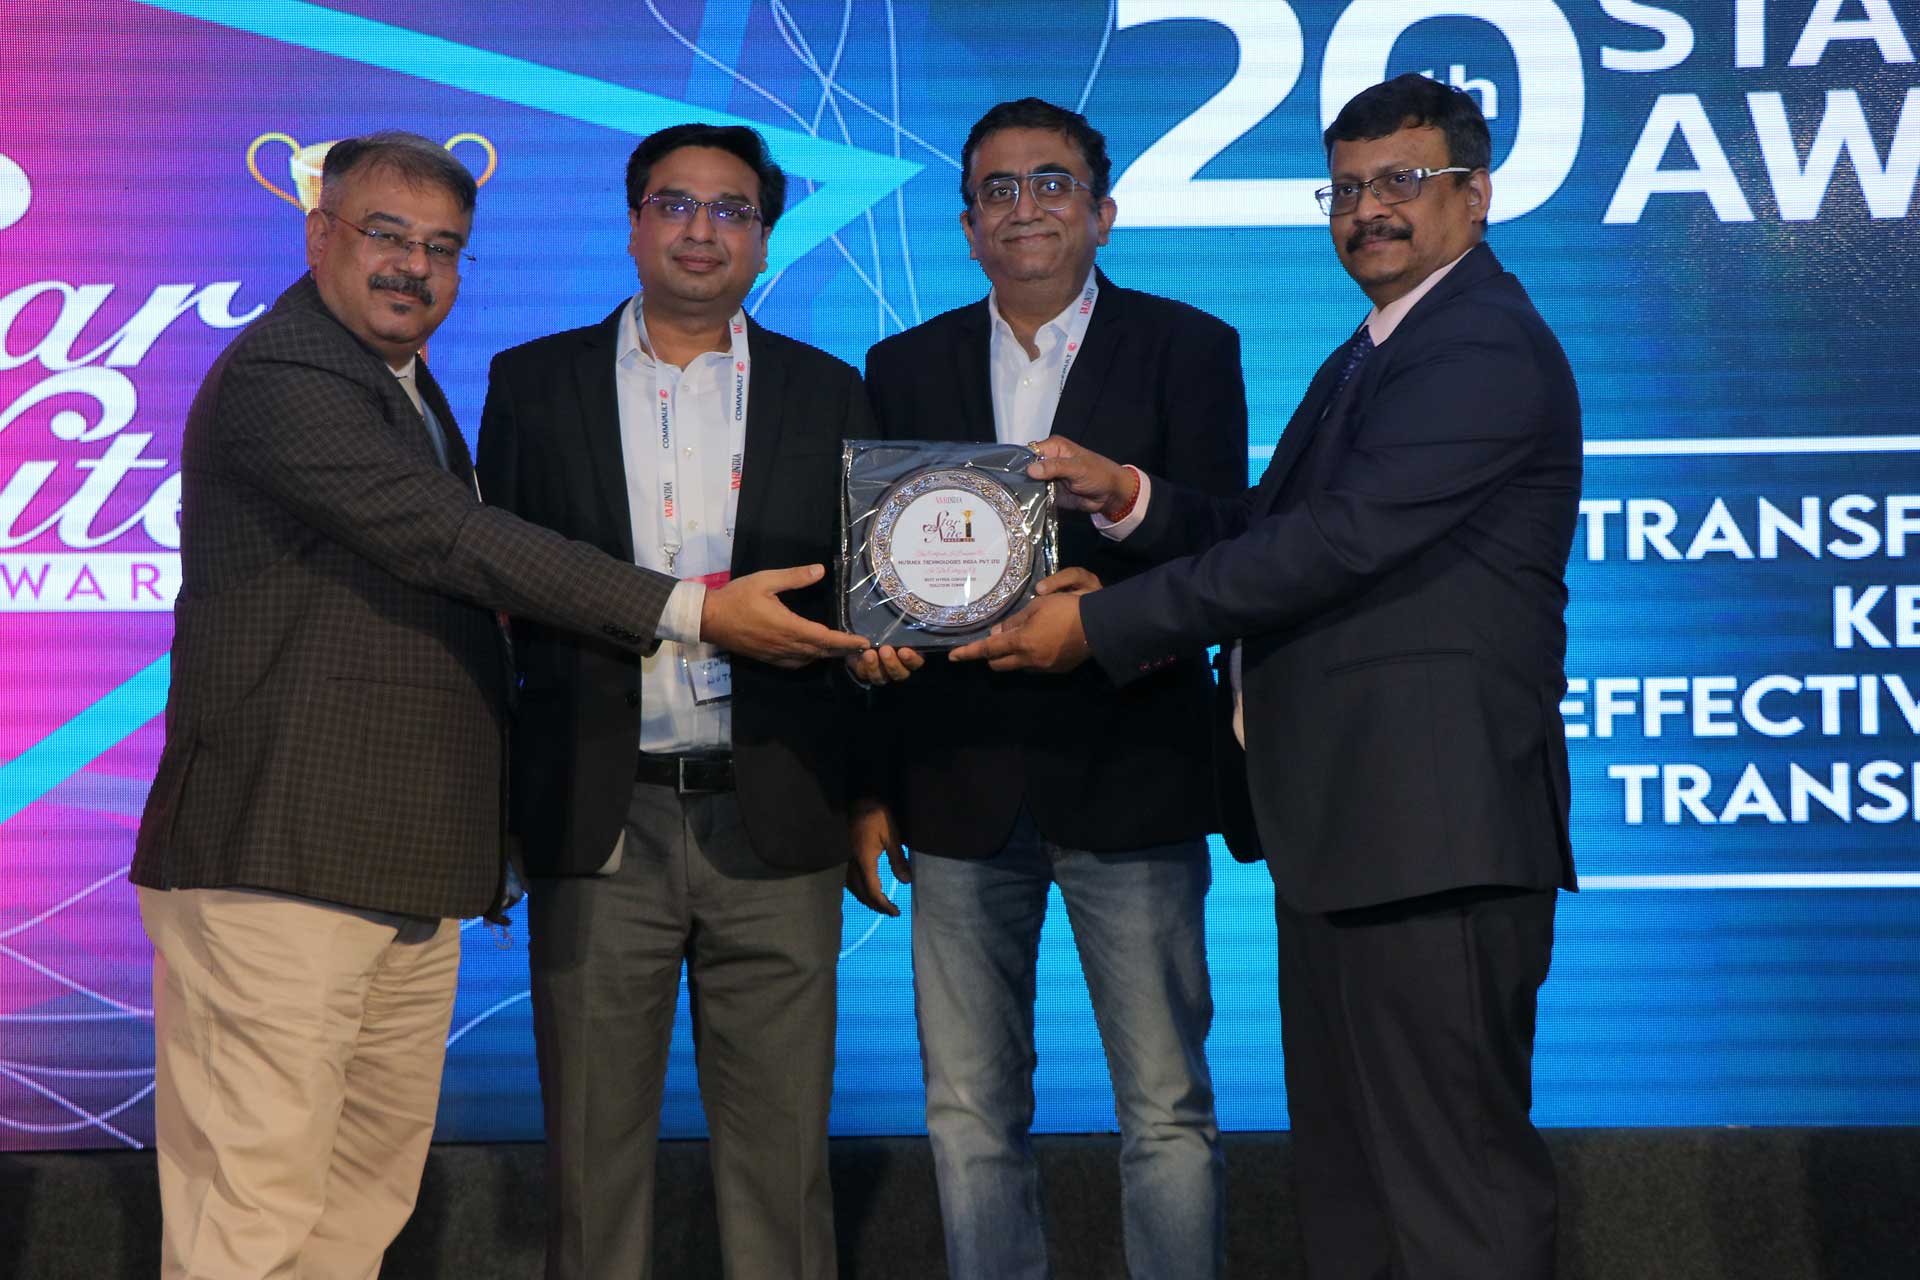 Best Hyper Converged Solution Company Award goes to Nutanix Technologies India Pvt Ltd at 20th Star Nite Awards 2021